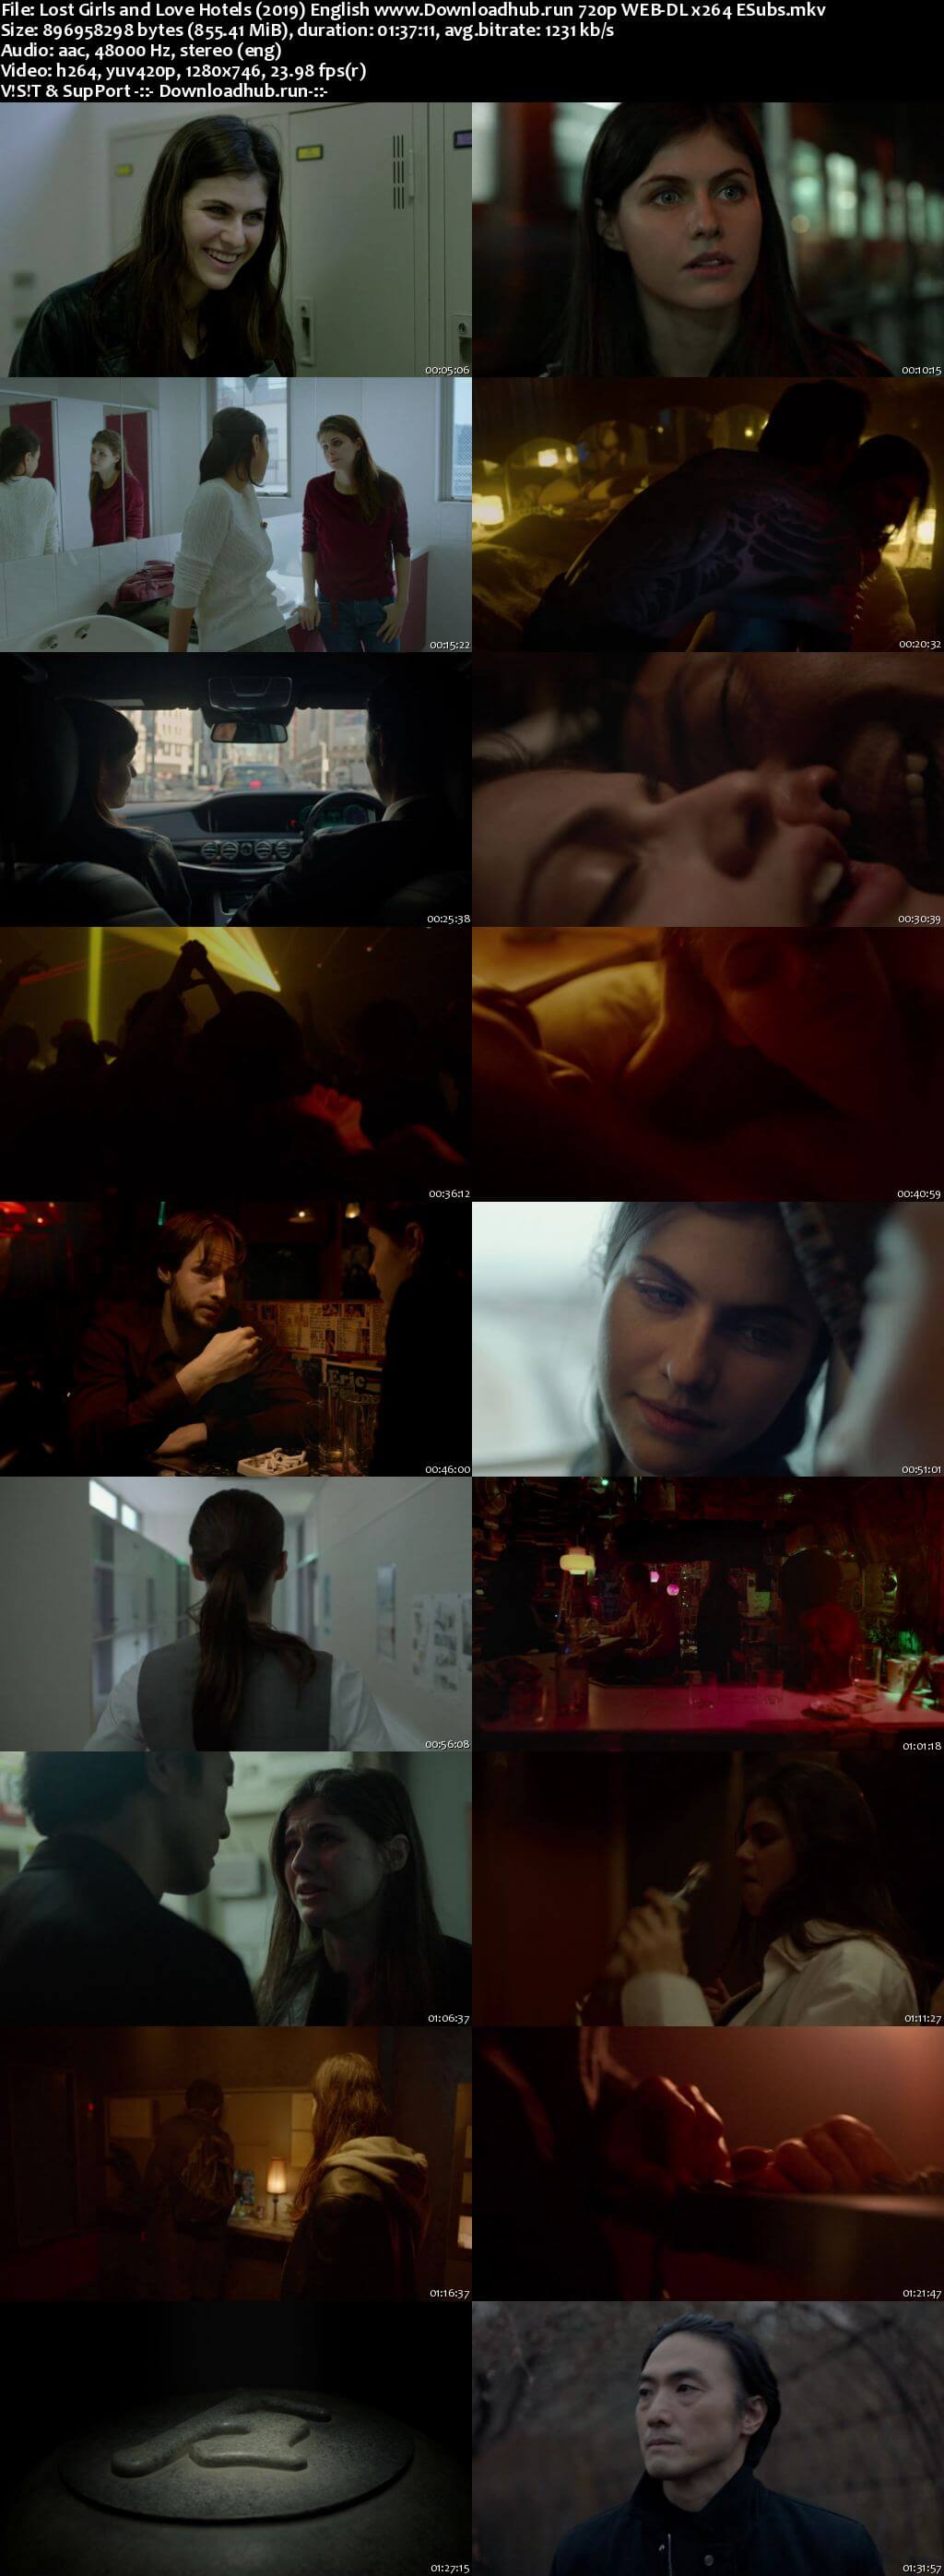 Lost Girls and Love Hotels 2020 English 720p Web-DL 850MB ESubs